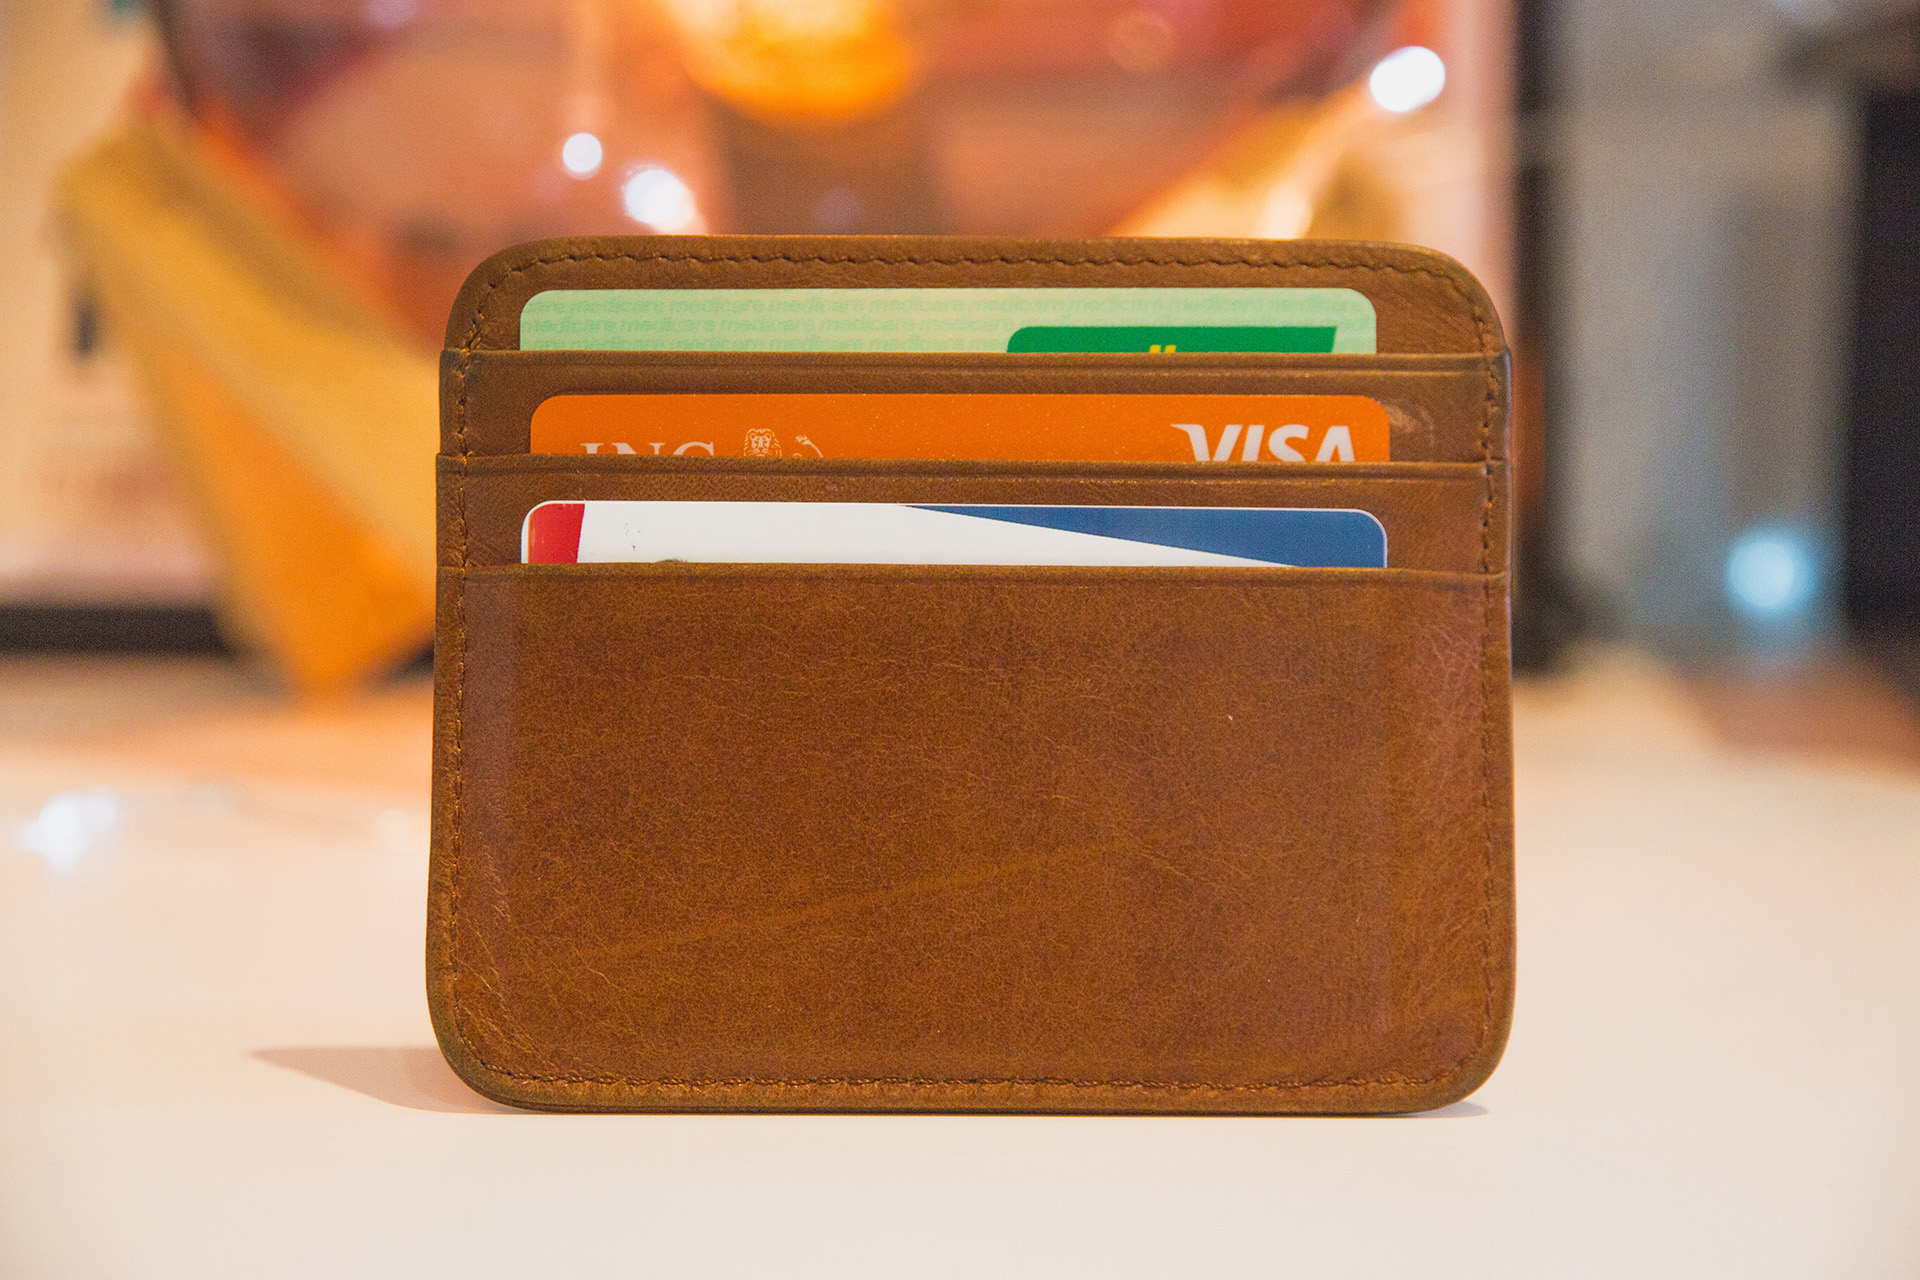 Secured Credit Cards: 5 Ways to Find Them